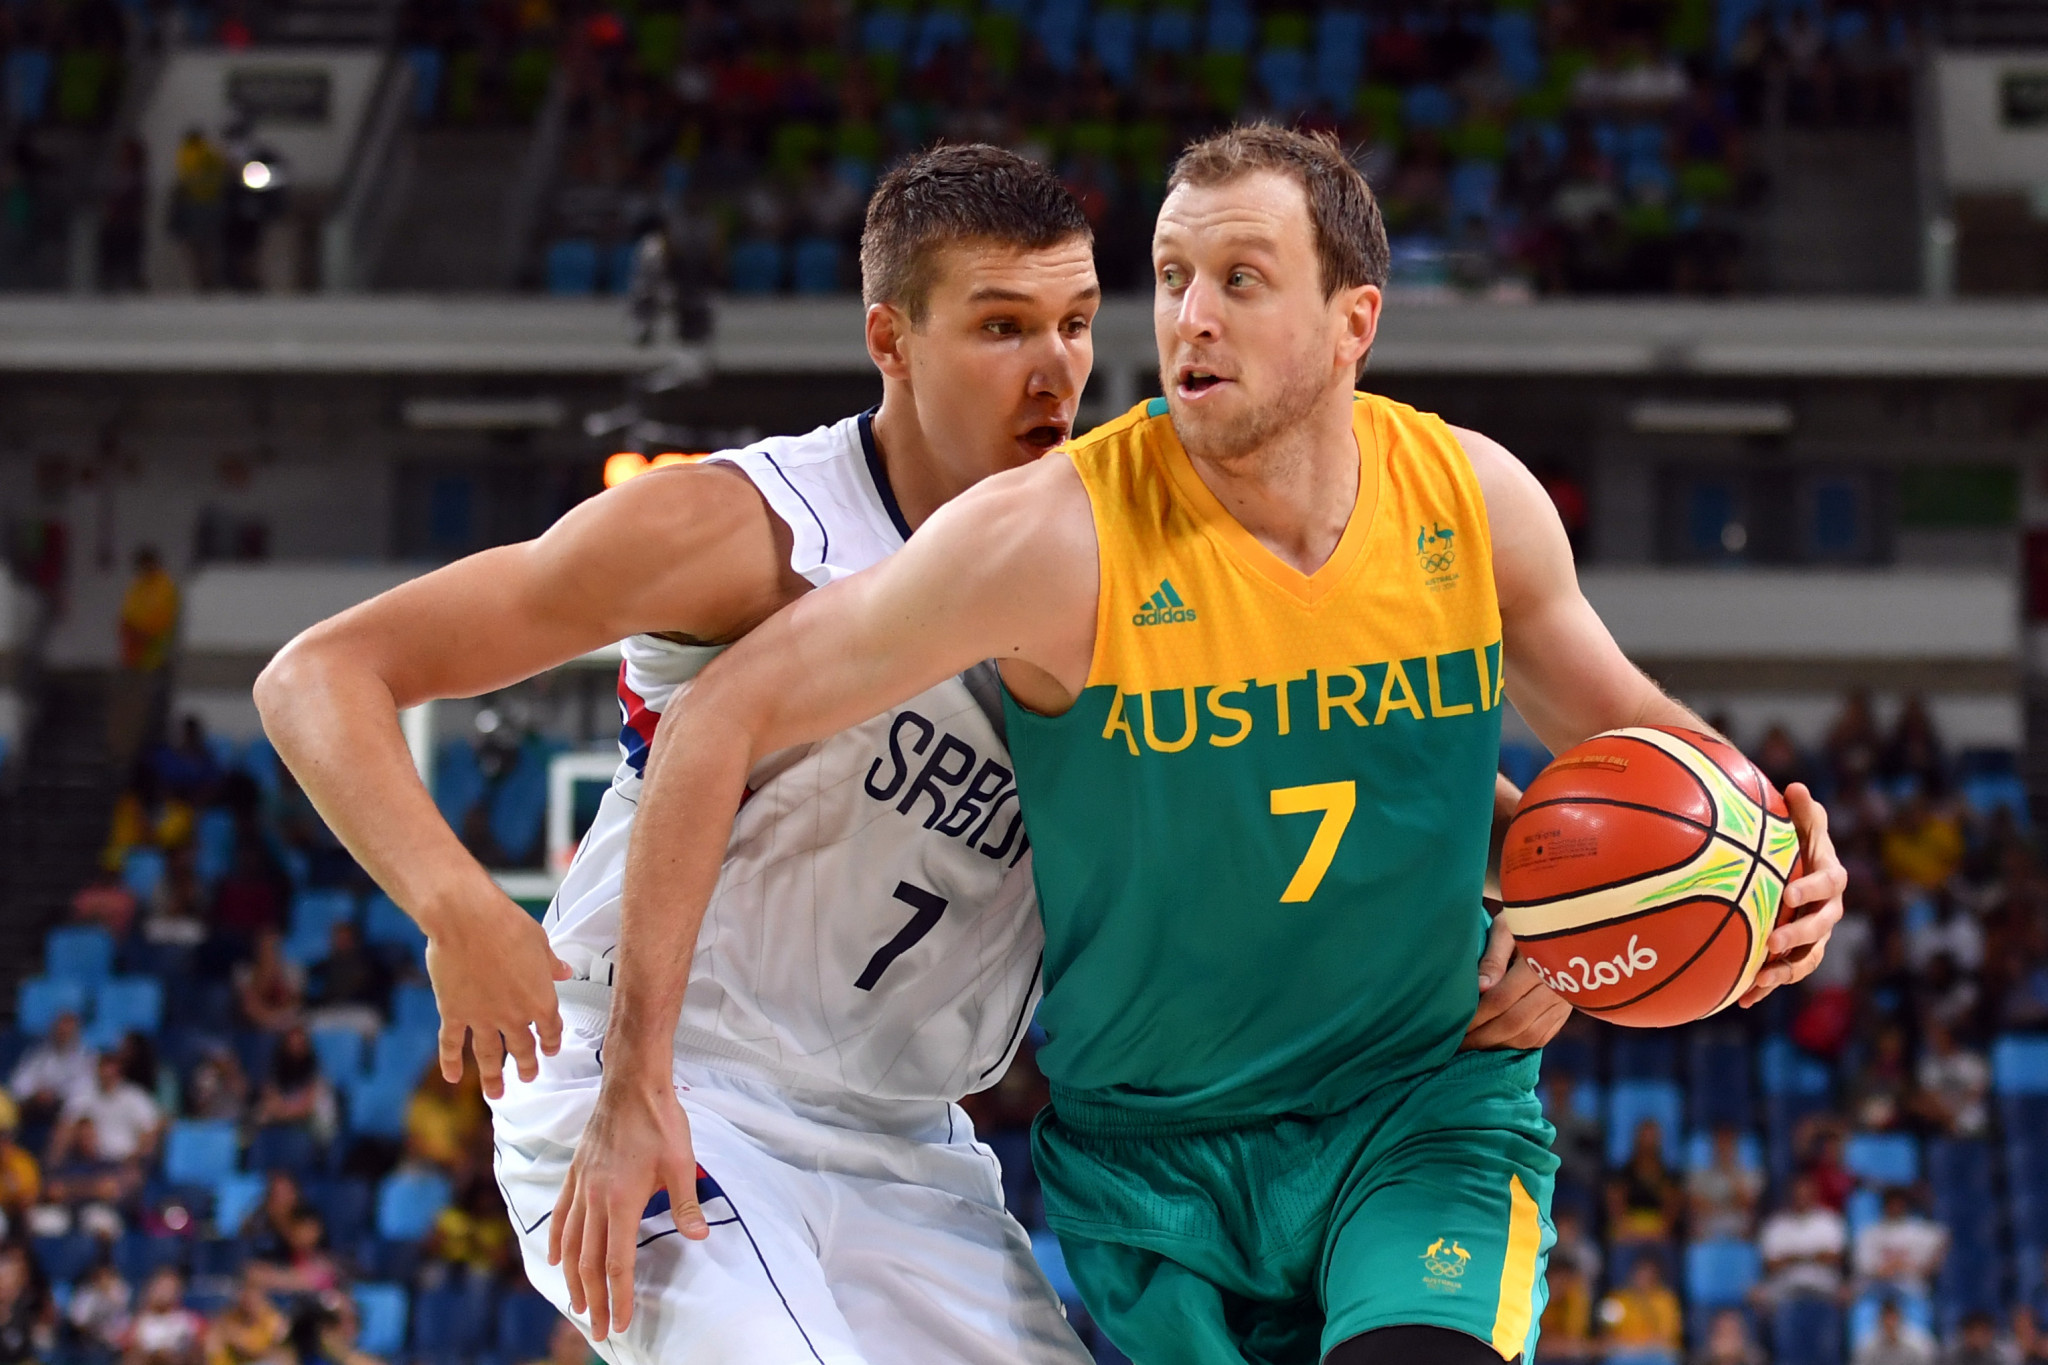 Joe Ingles is on track to represent Australia at his fourth Olympic Games at Tokyo 2020 ©Getty Images